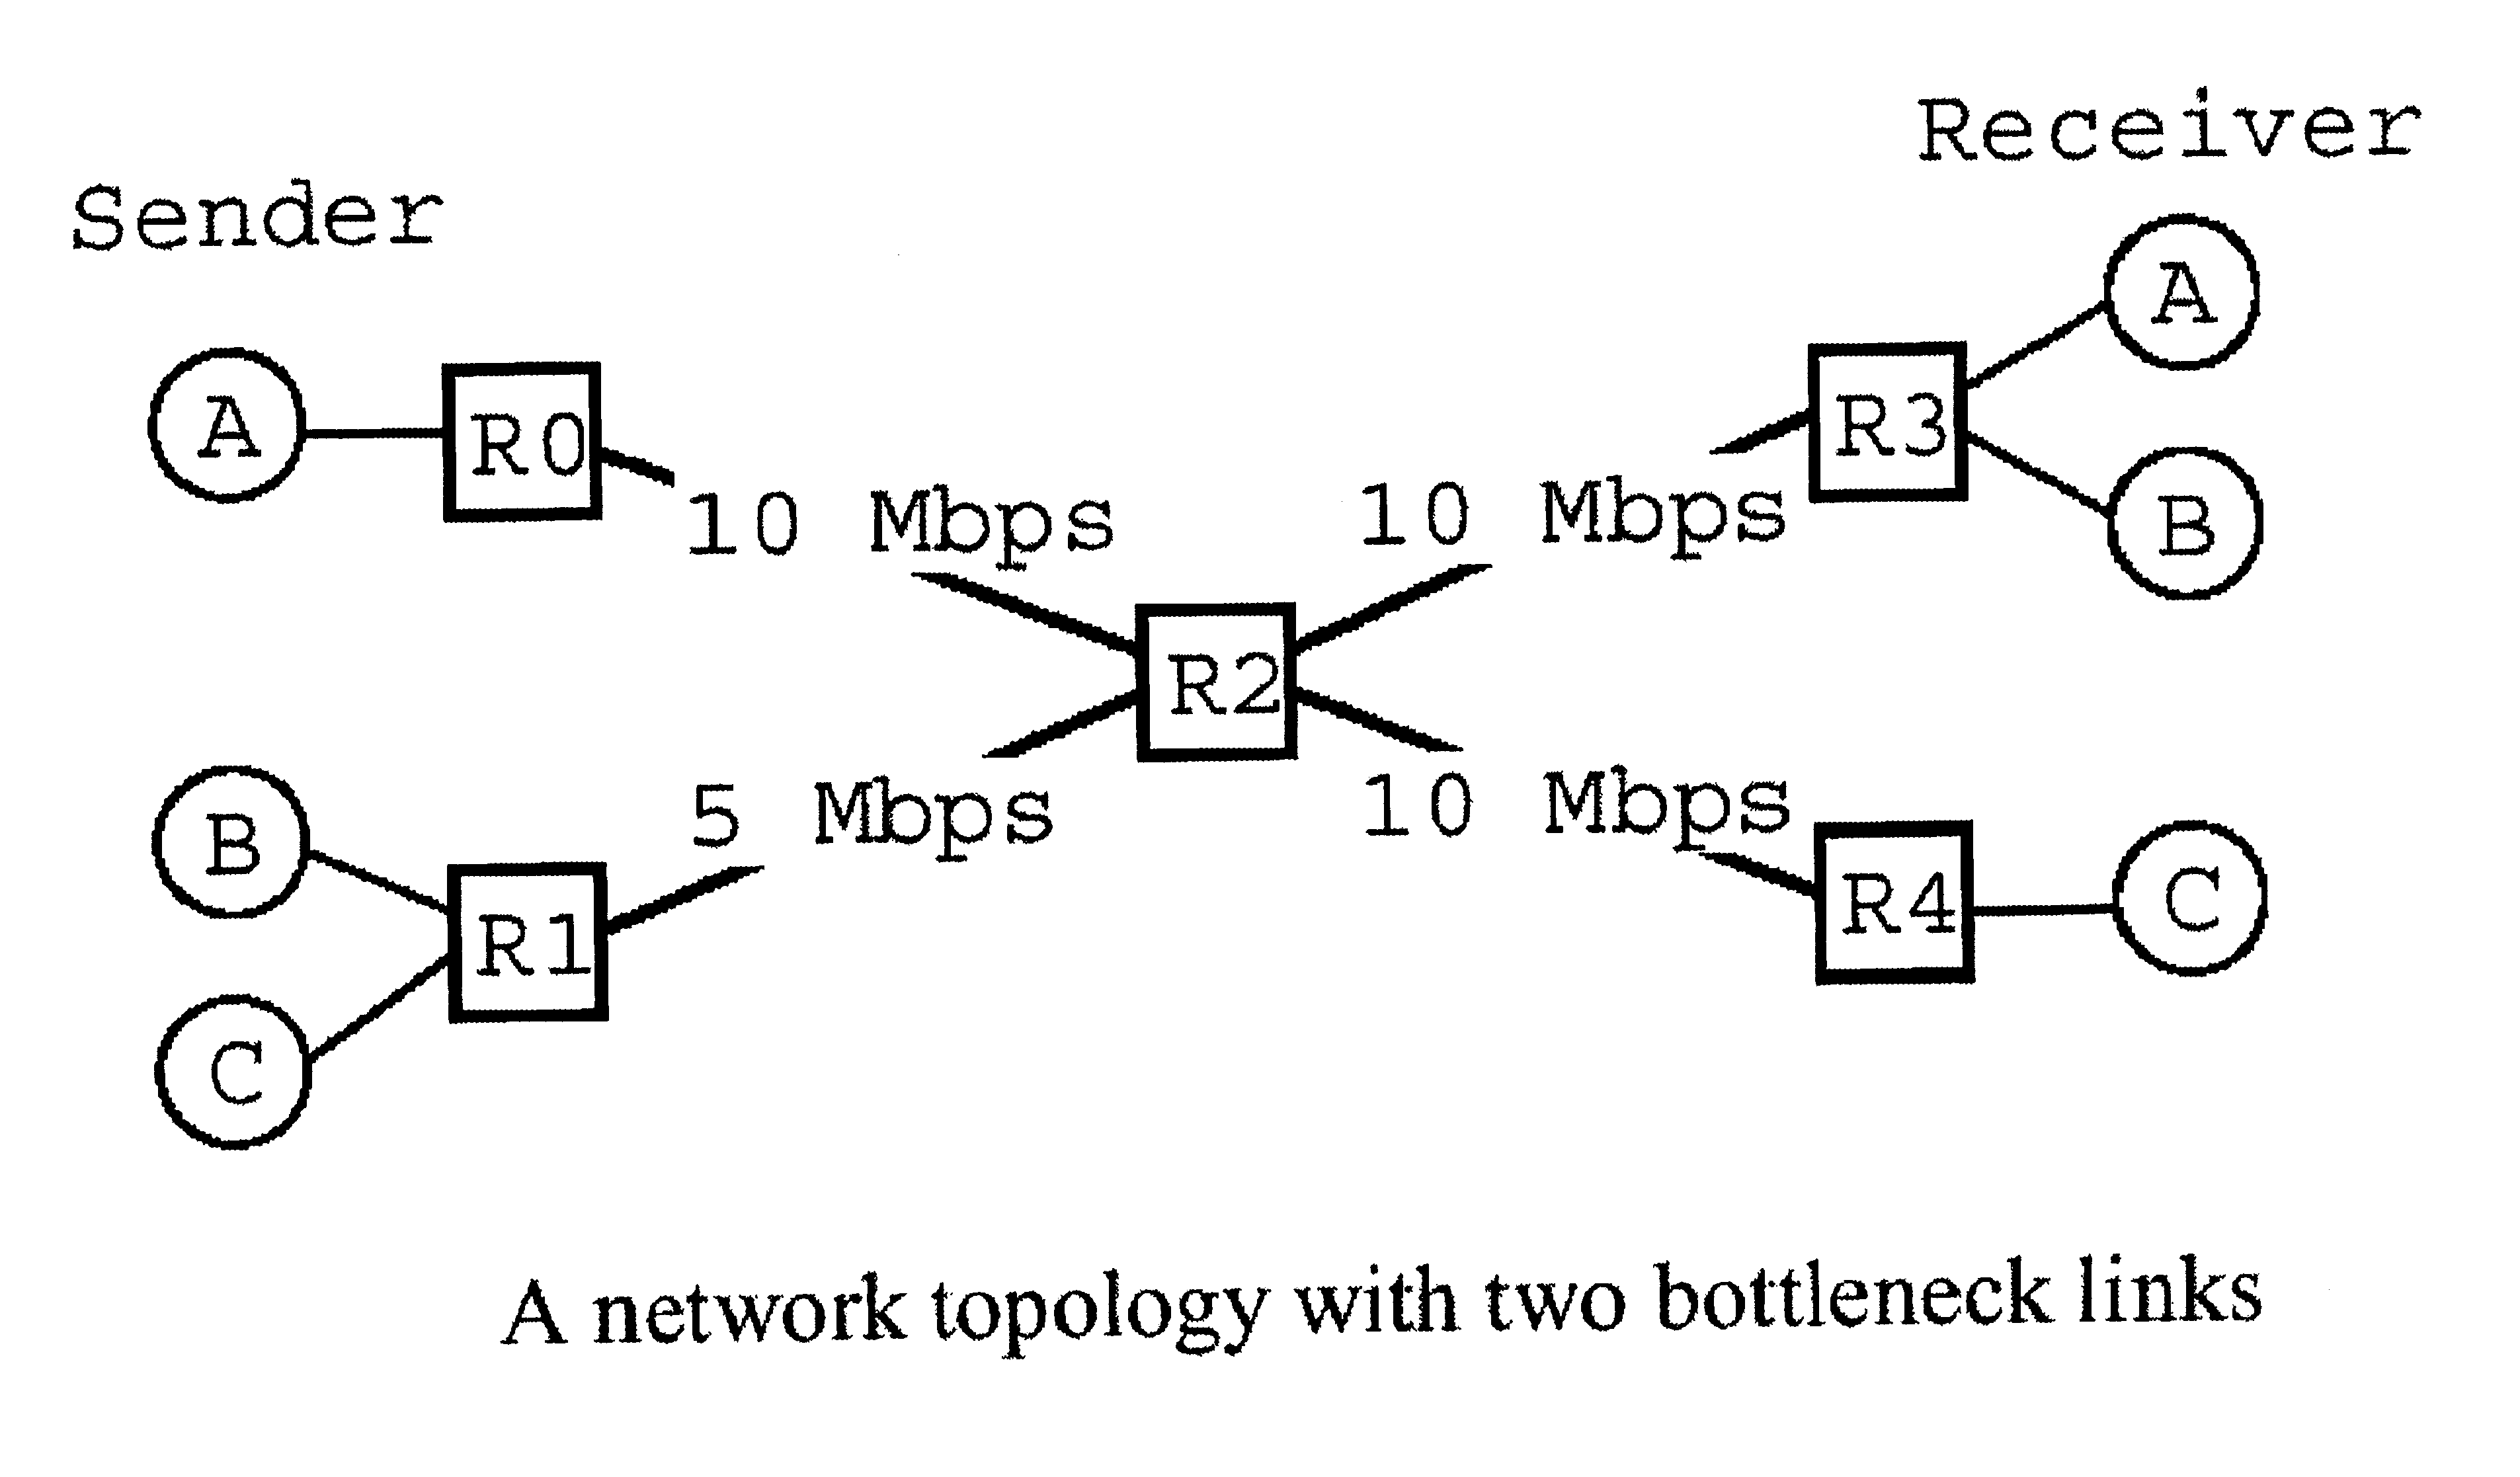 Modeling link throughput in IP networks